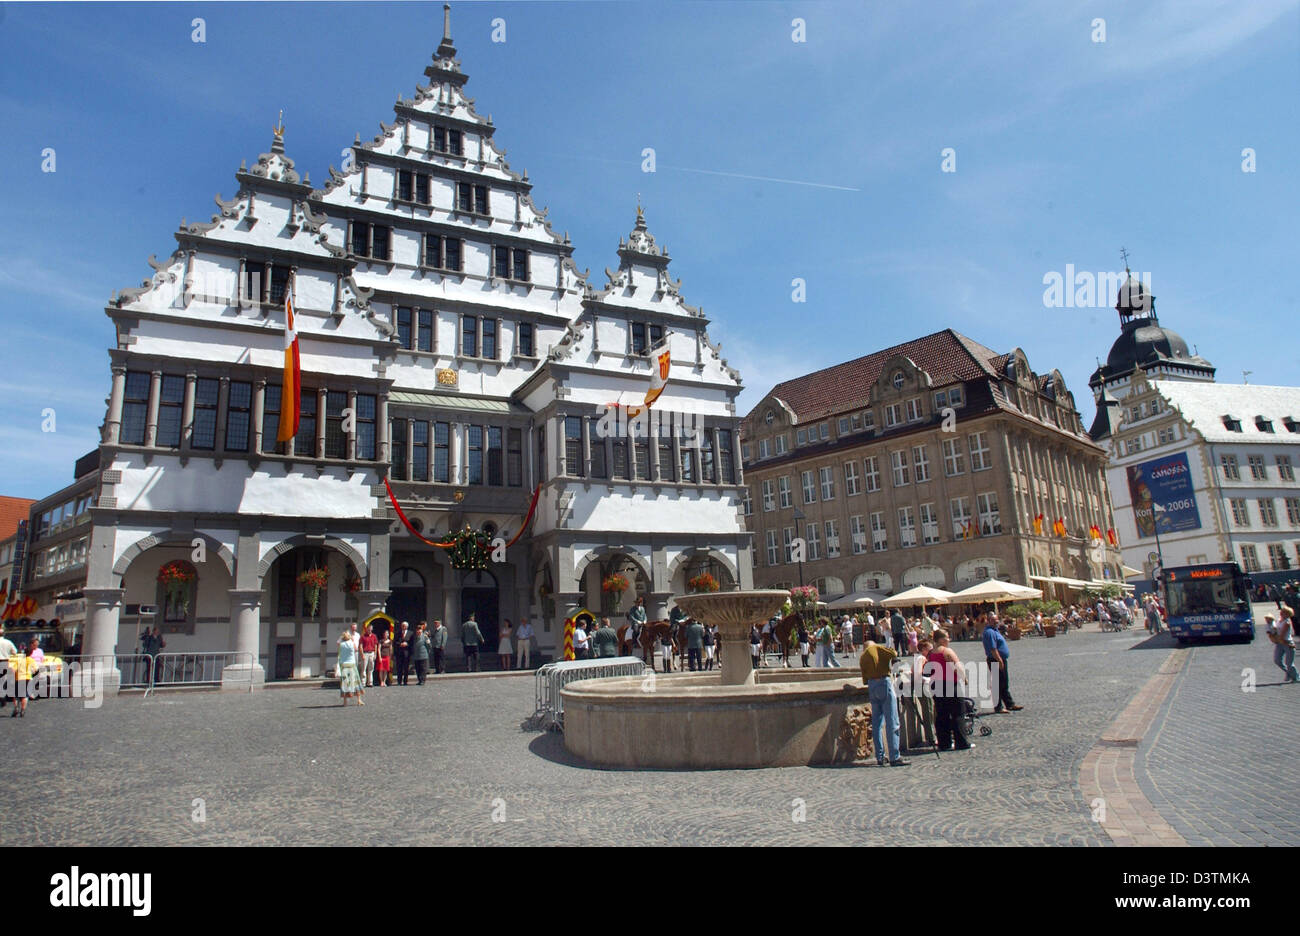 (dpa file) - The picture shows the medieval guild hall and landmark of Paderborn, Germany, 15 July 2006. It was constructed from 1613-1620 in Weser Renaissance style. Photo: Horst Ossinger Stock Photo